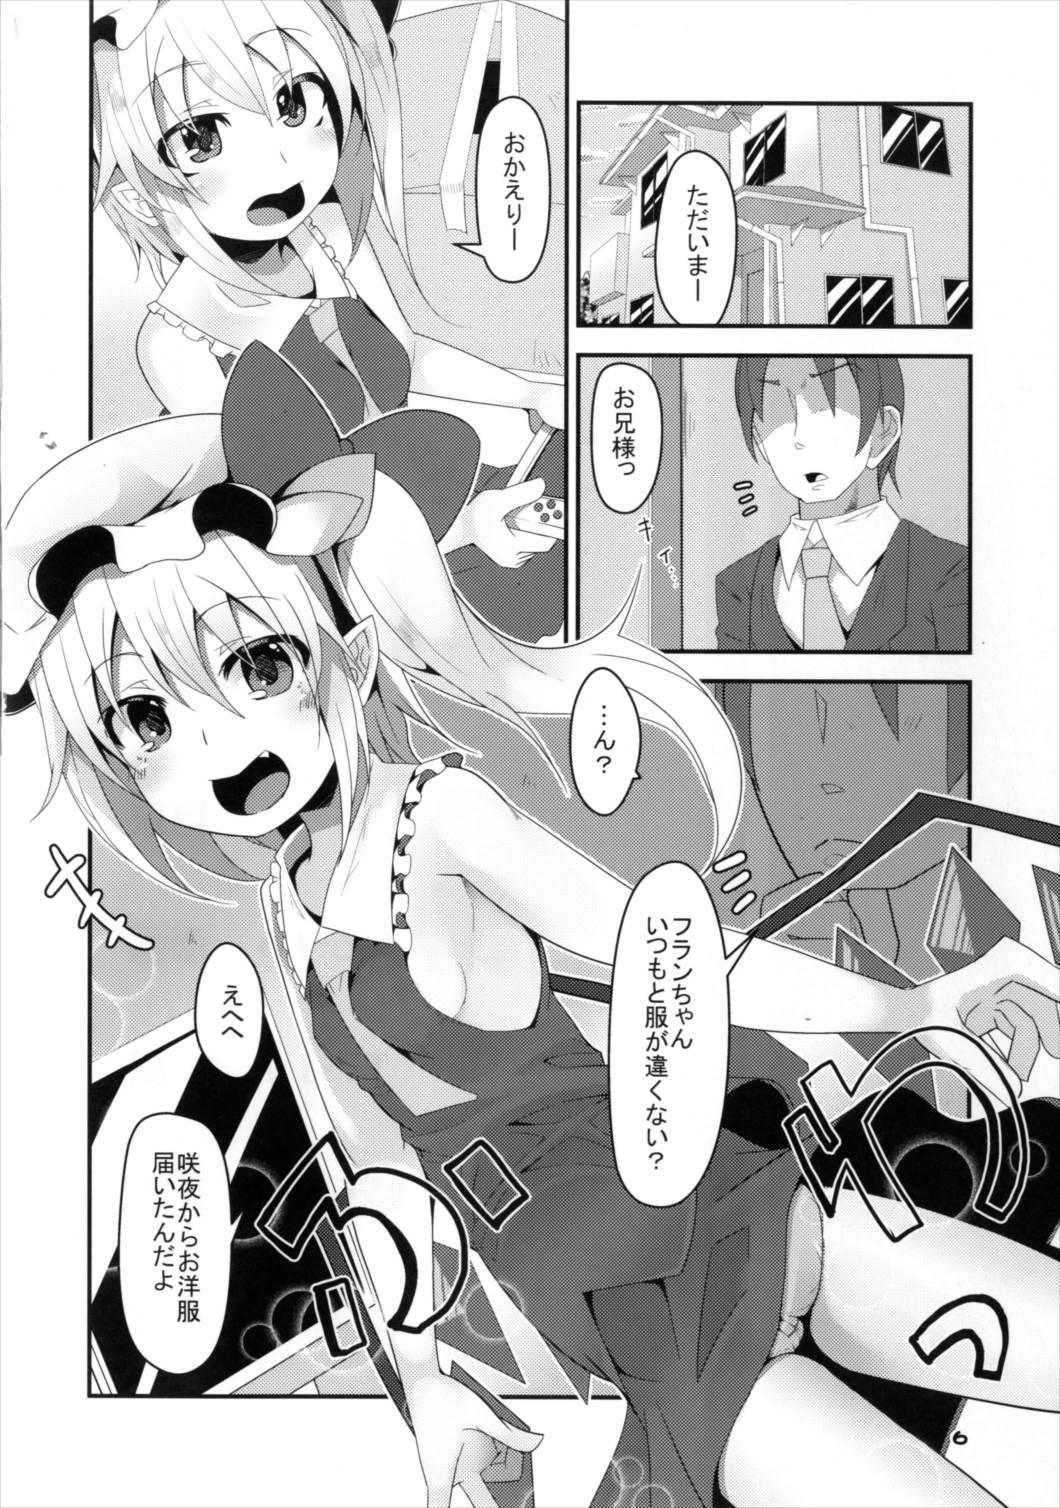 Gros Seins FLAN-CHAN COOL BIZ - Touhou project Old And Young - Page 5